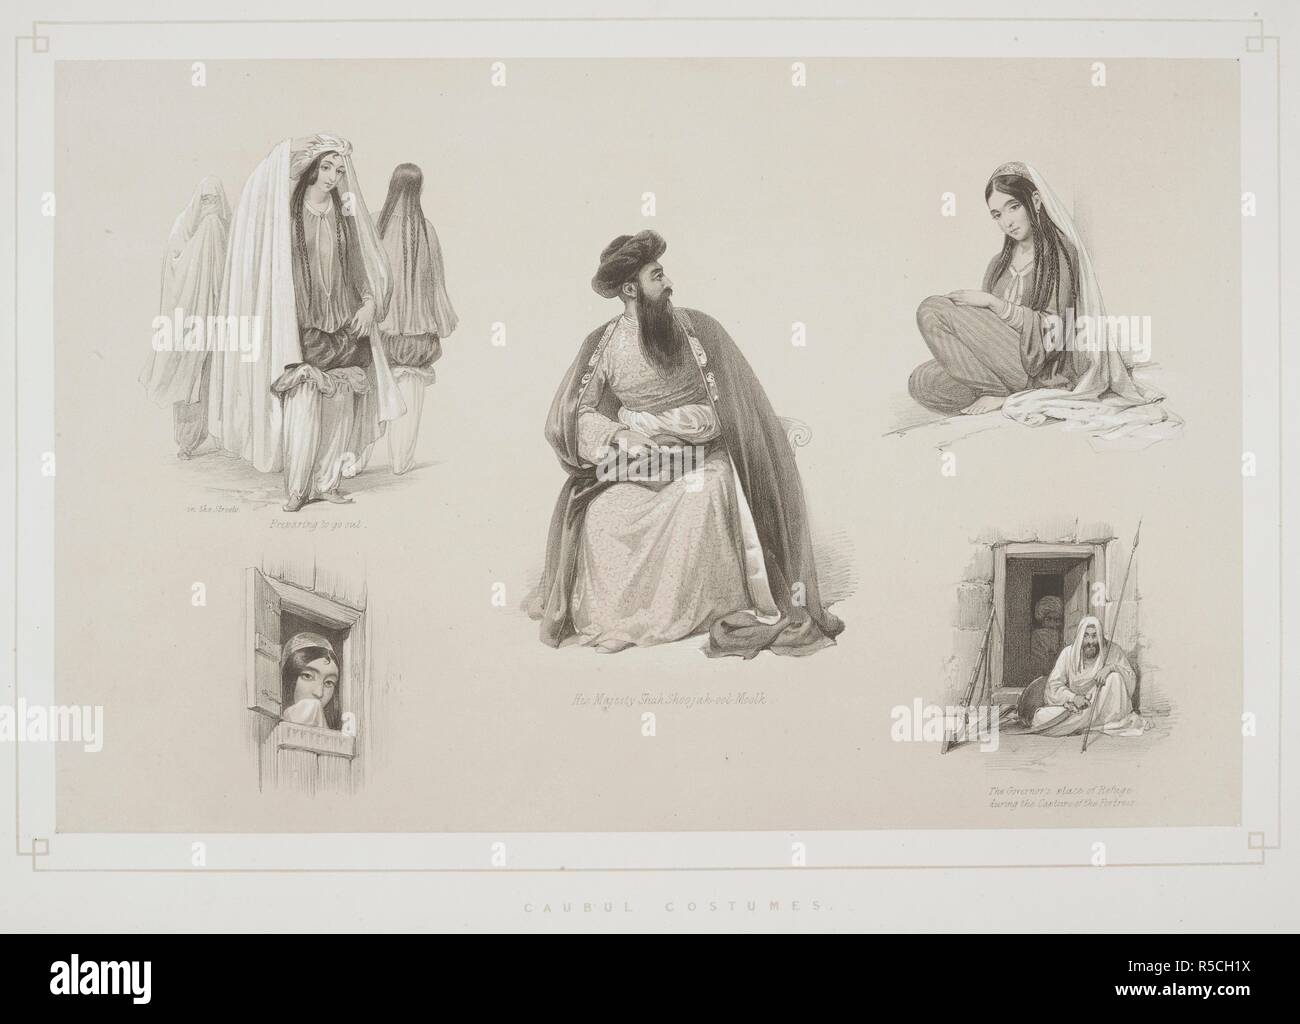 Caubul costumes. His Majesty Sha Shoojah-ool Moolk. Sketches in Afghaunistan. London : H. Graves & Co., [1842]. Source: X812 plate 29. Author: Atkinson, James. Stock Photo